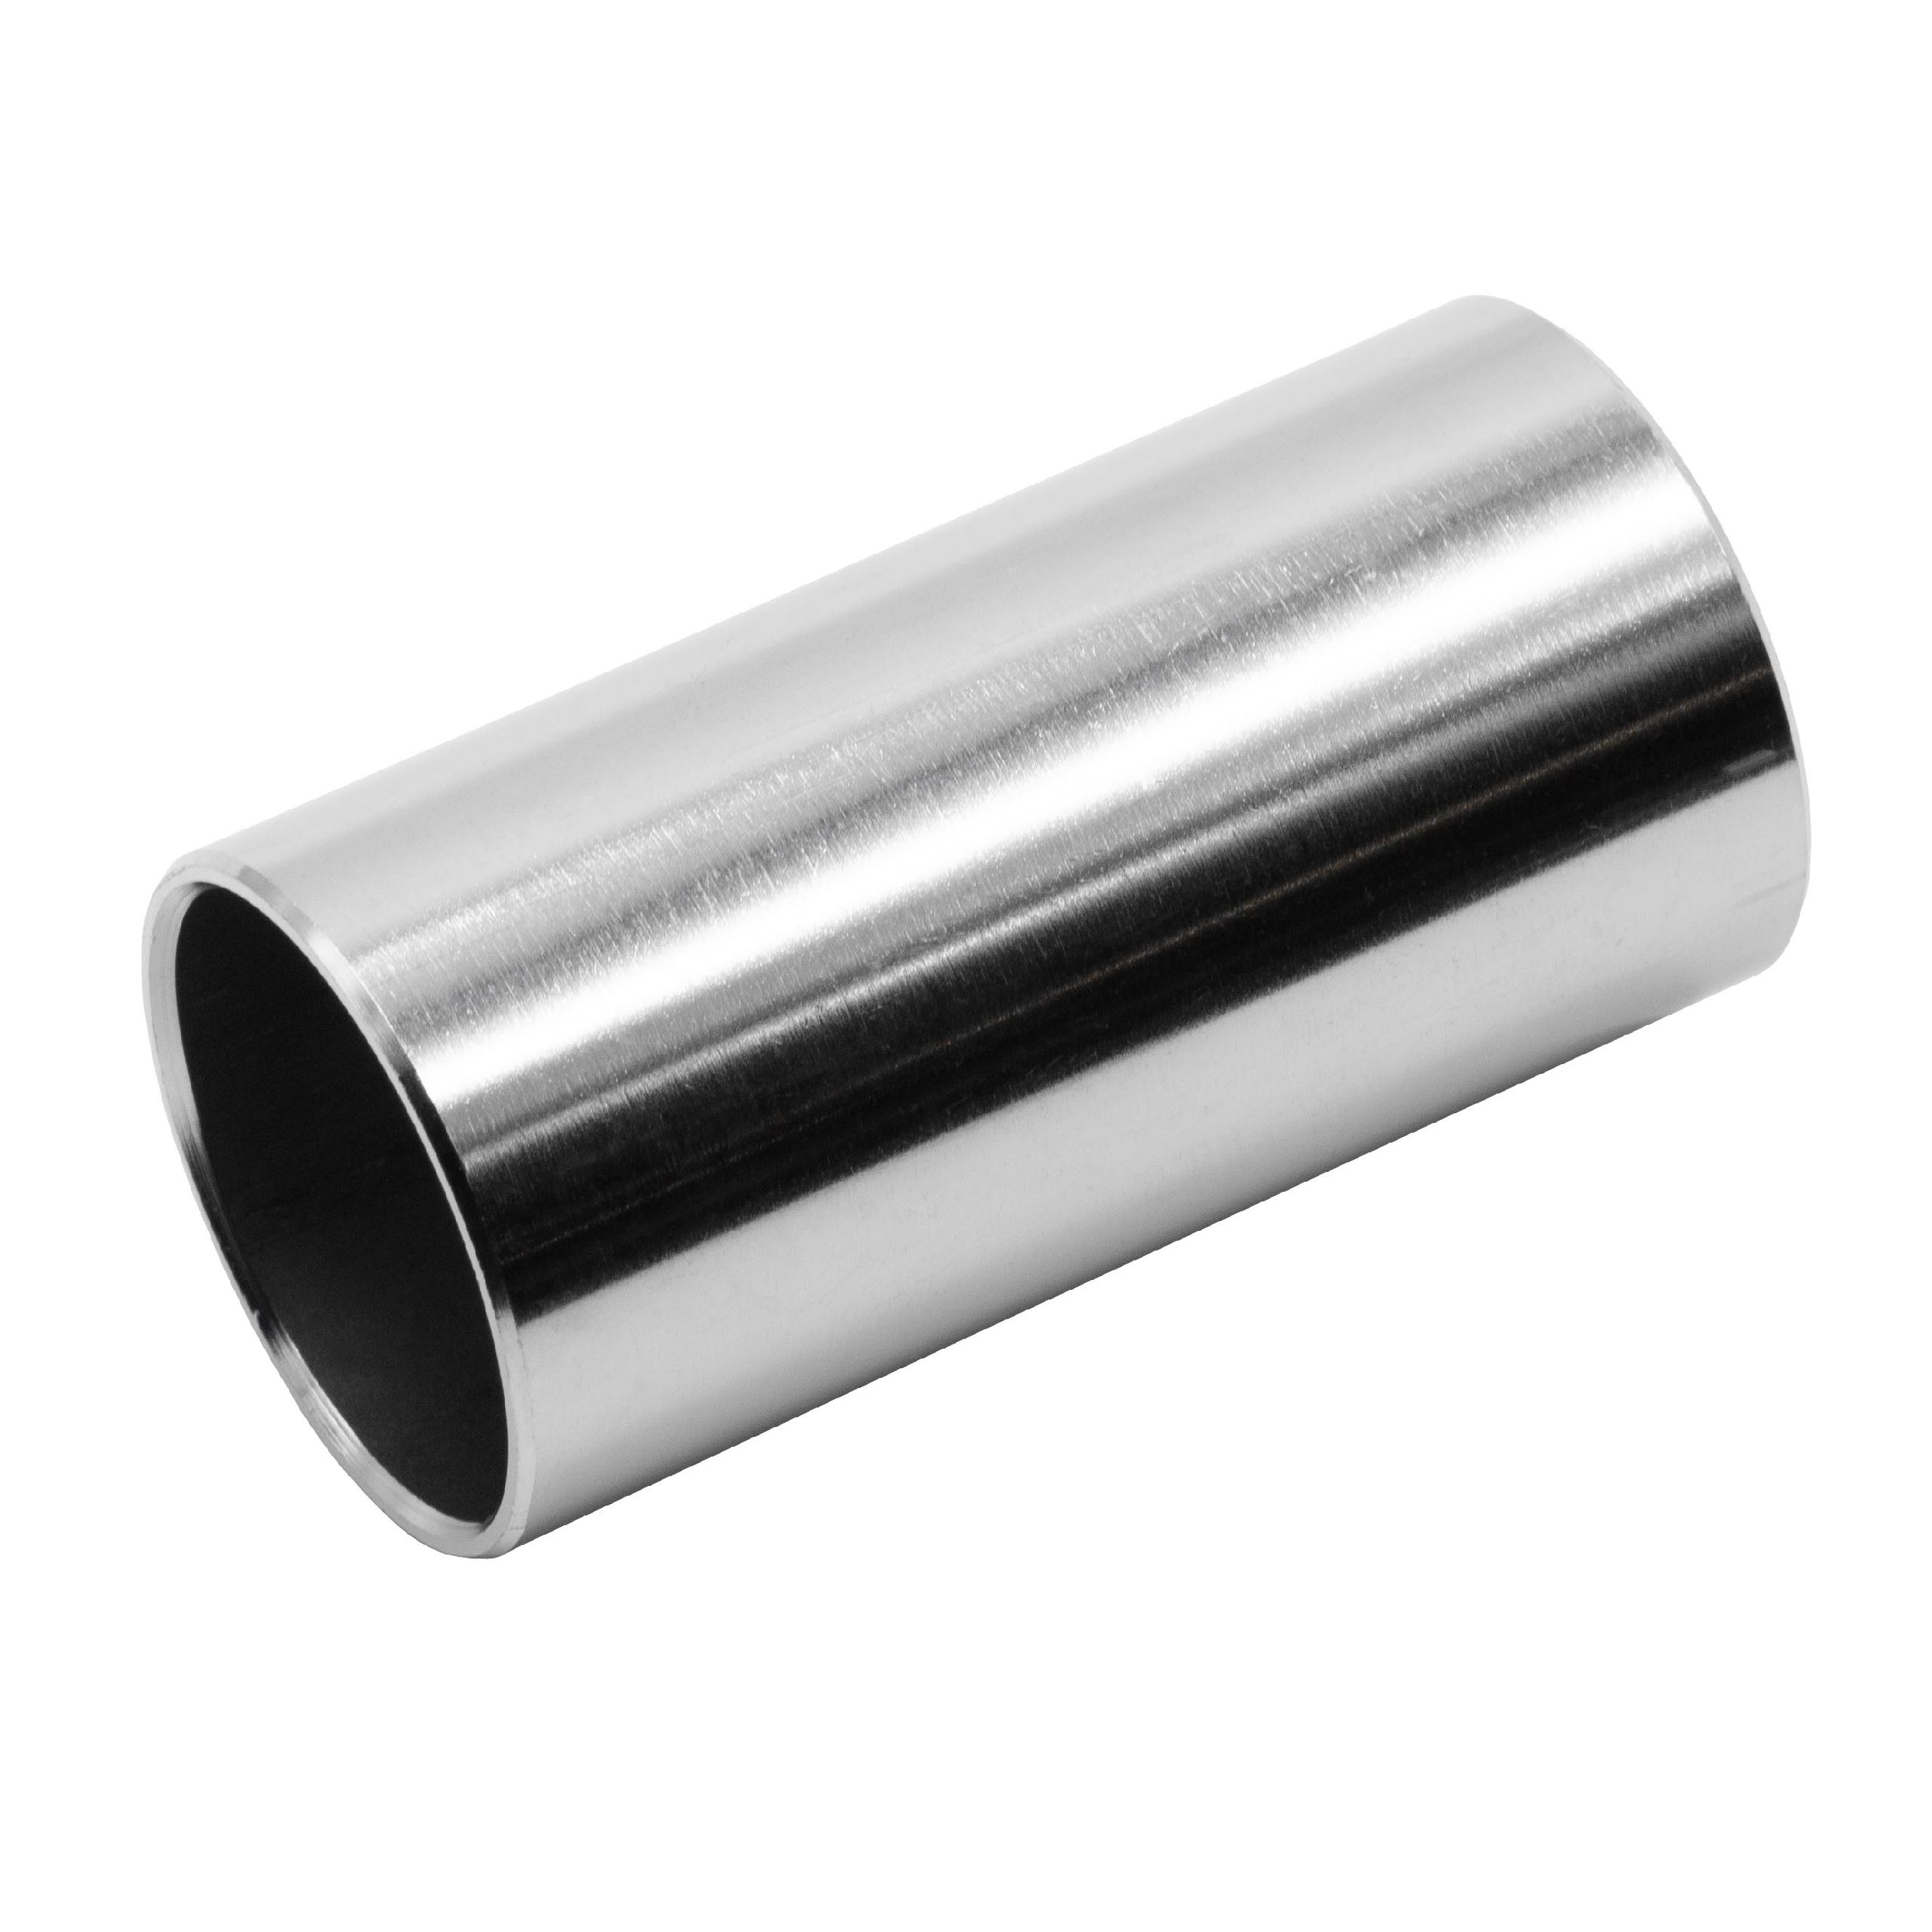 Guitar Slide 51mm stainless steel - Solid, Secure Hold